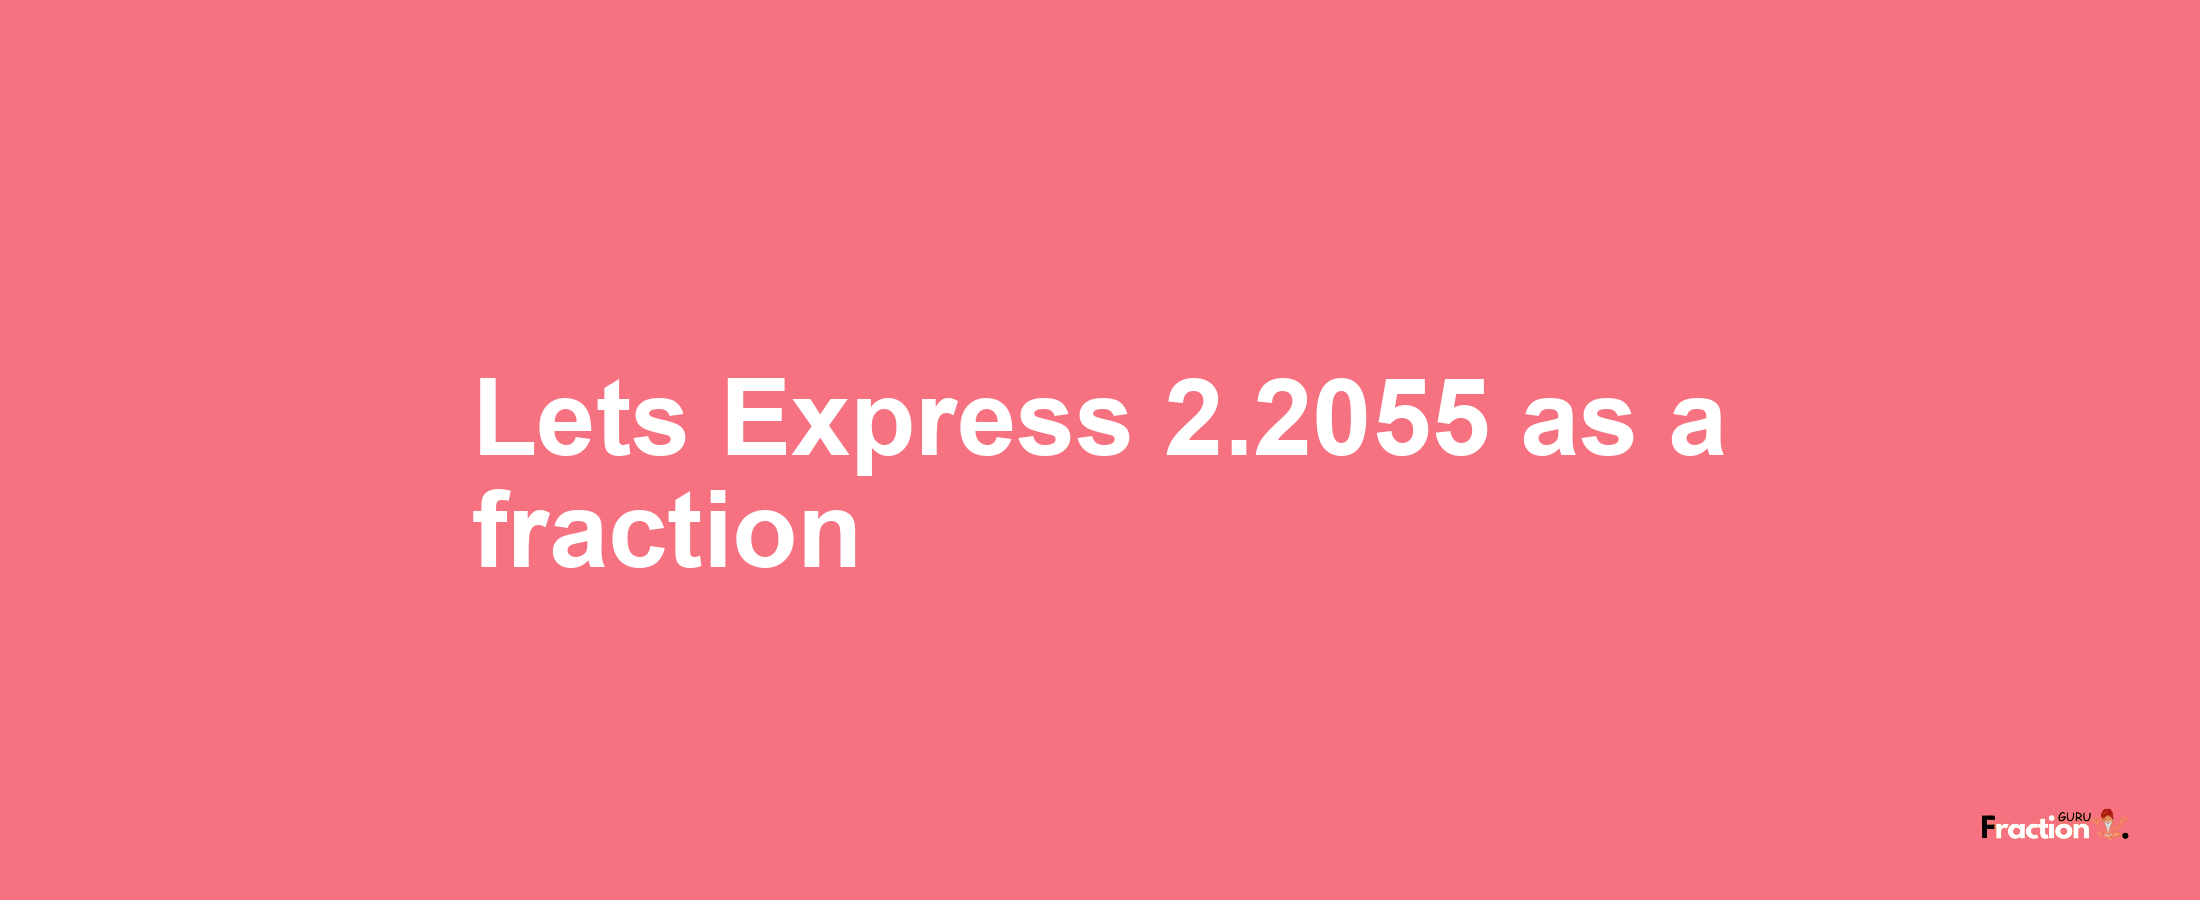 Lets Express 2.2055 as afraction